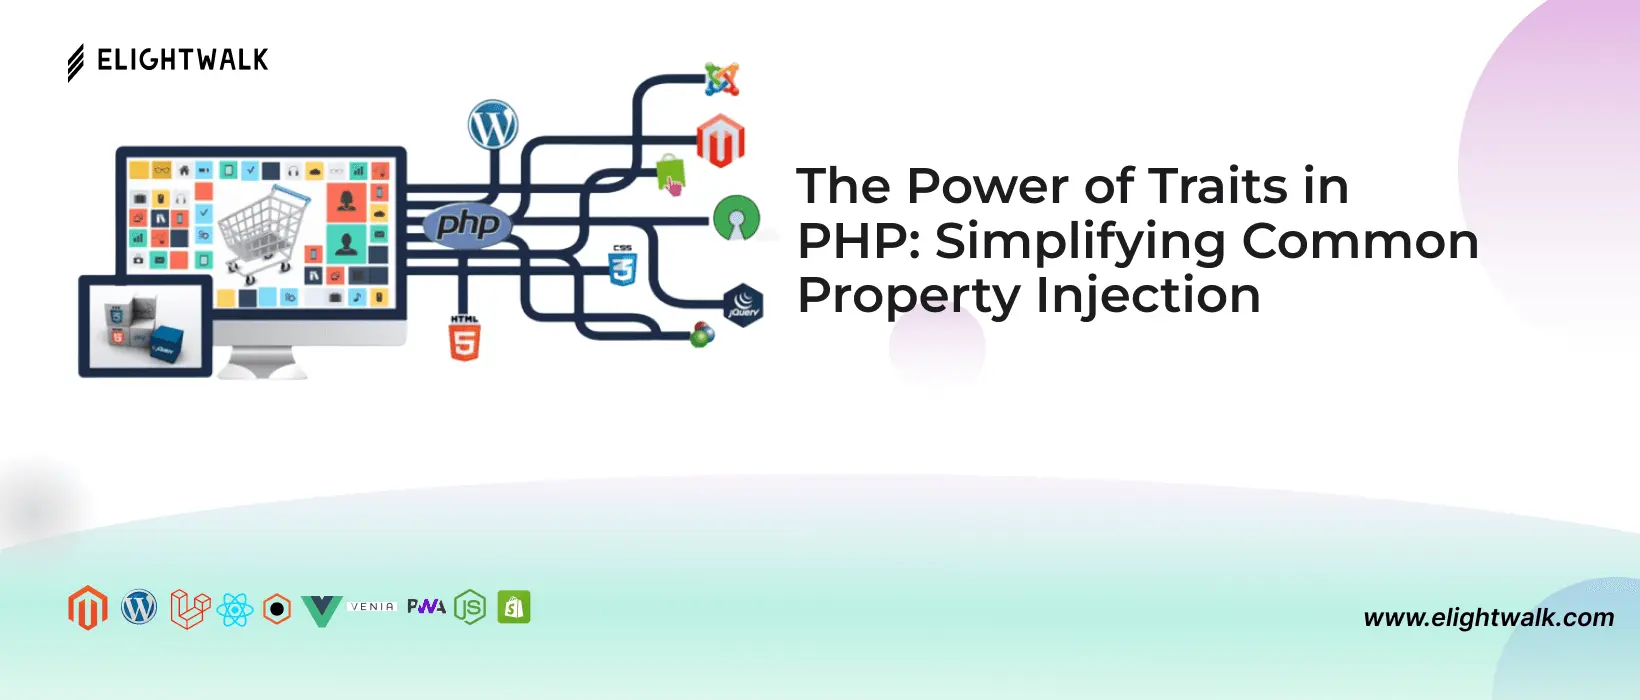 The Power of Traits in PHP: Simplifying Common Property Injection